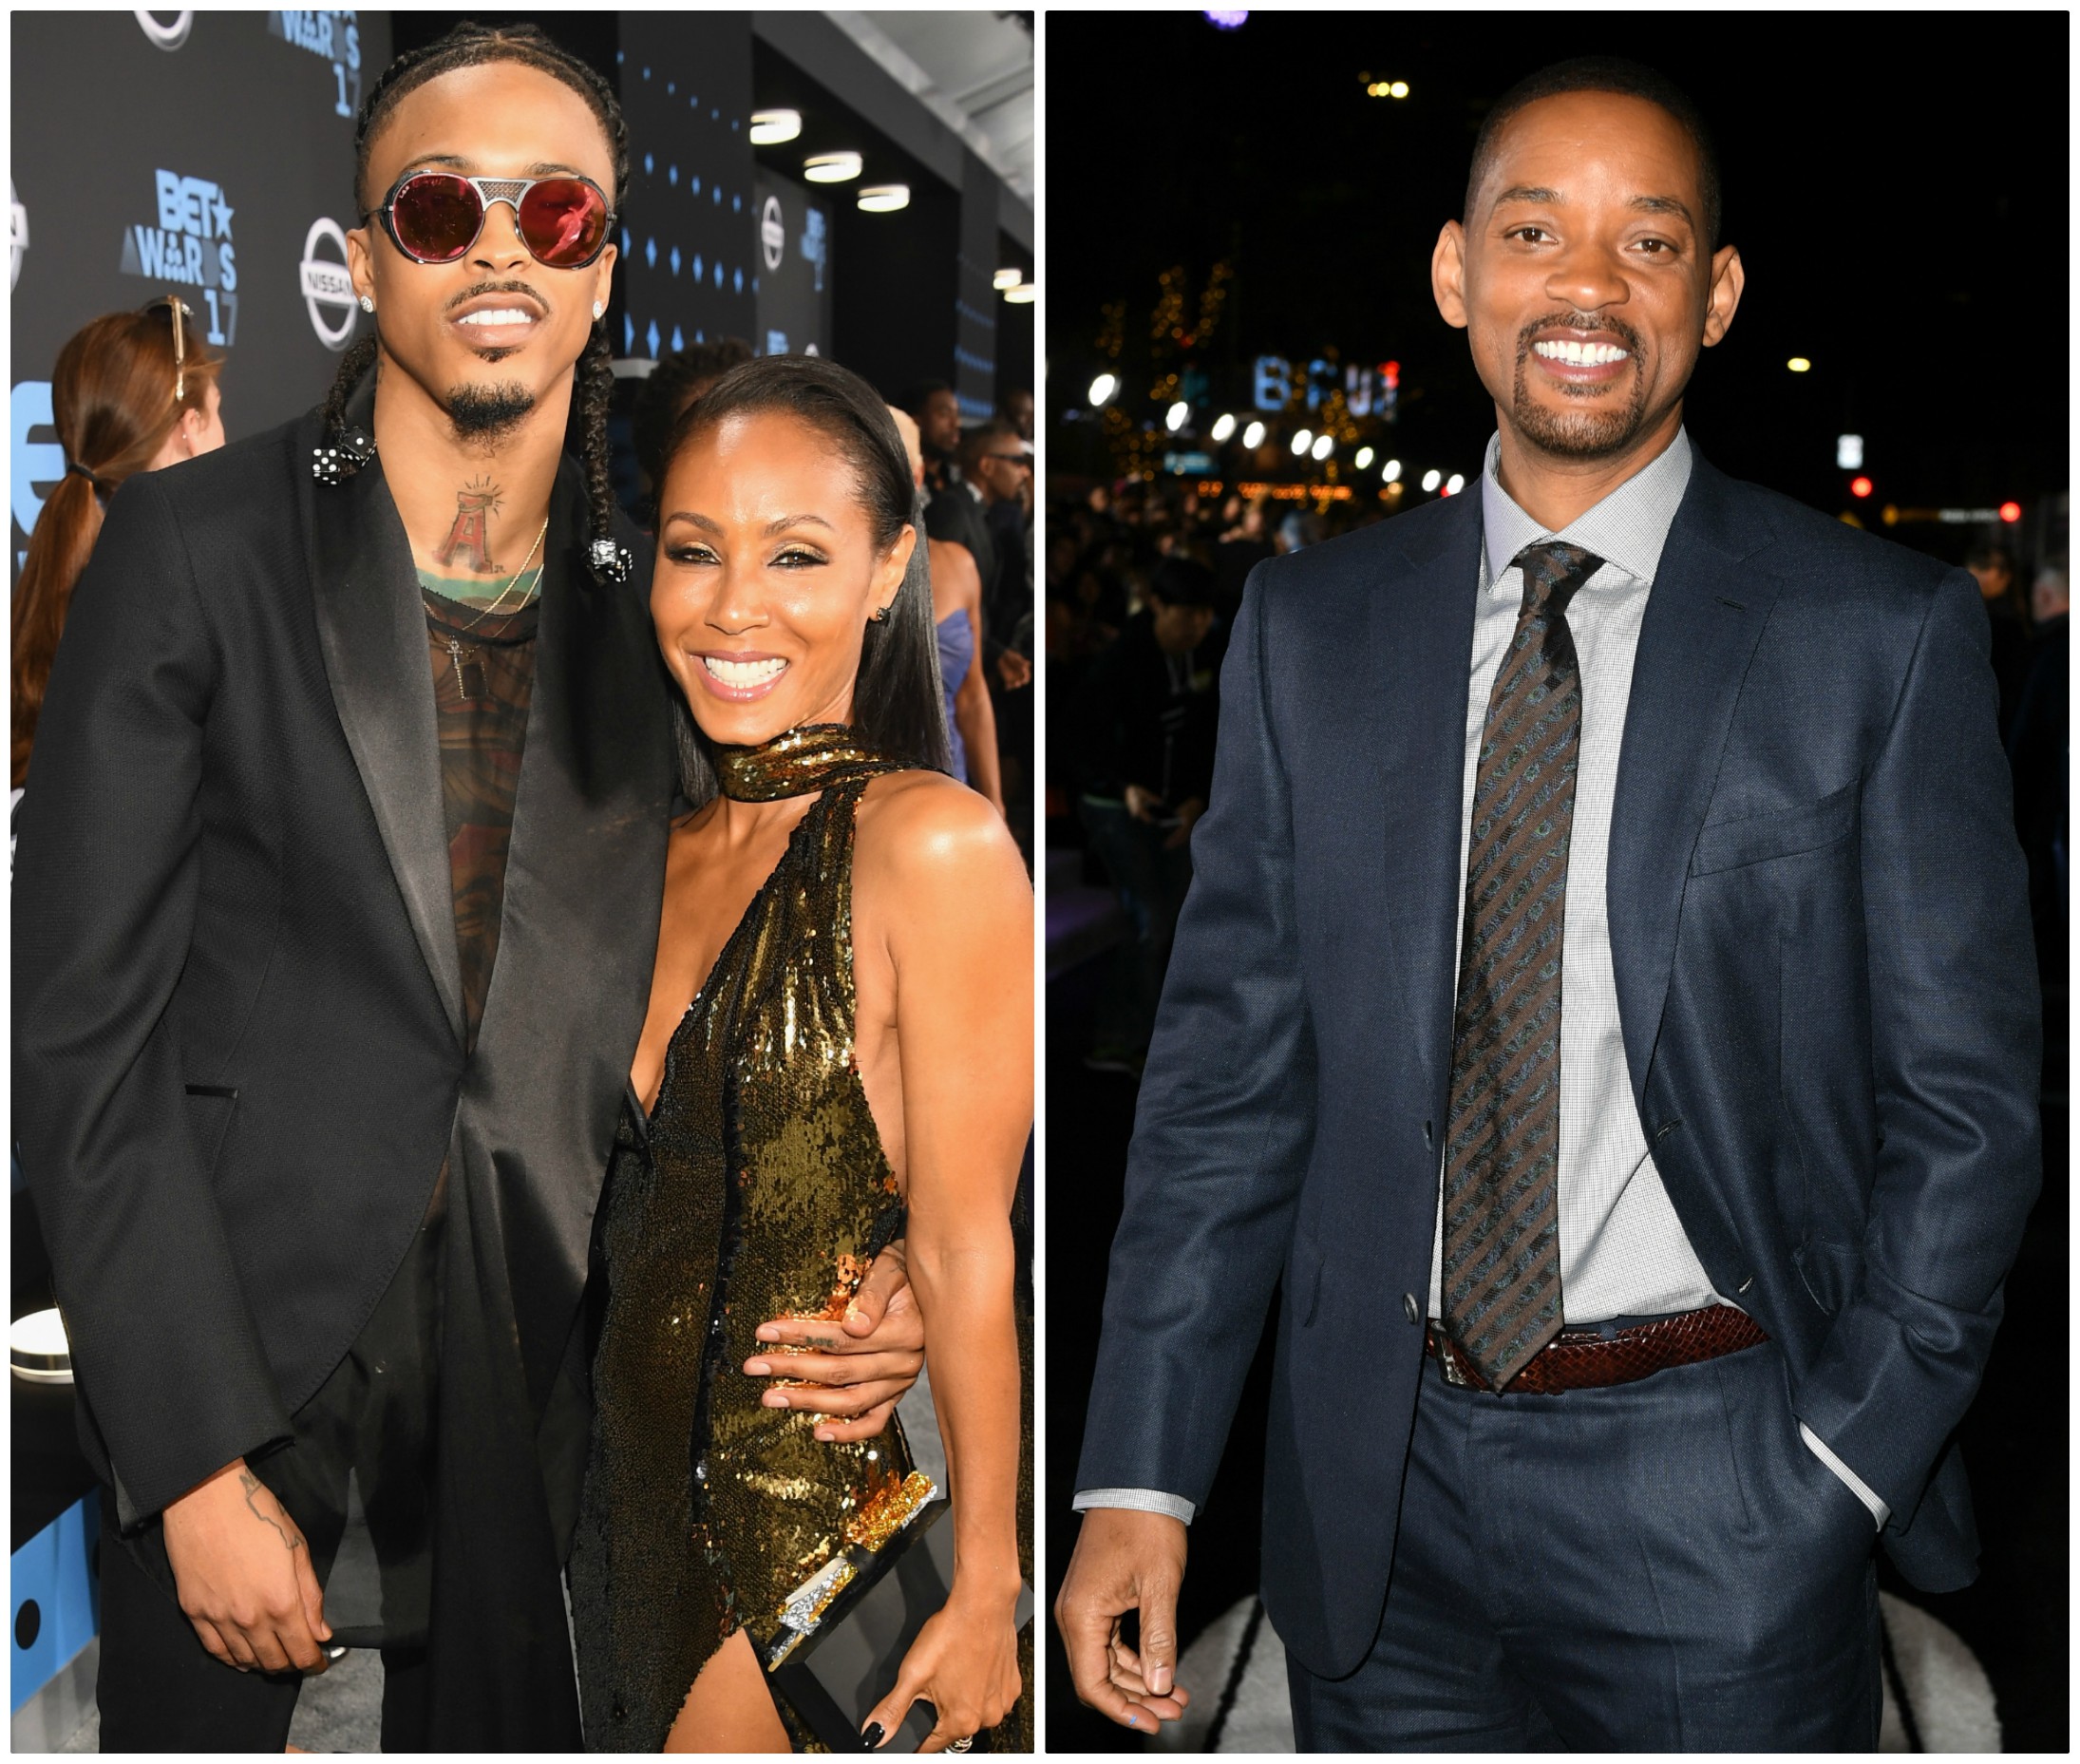 August Alsina Reveals He Loved Jada Pinkett-Smith, With Will's Blessing